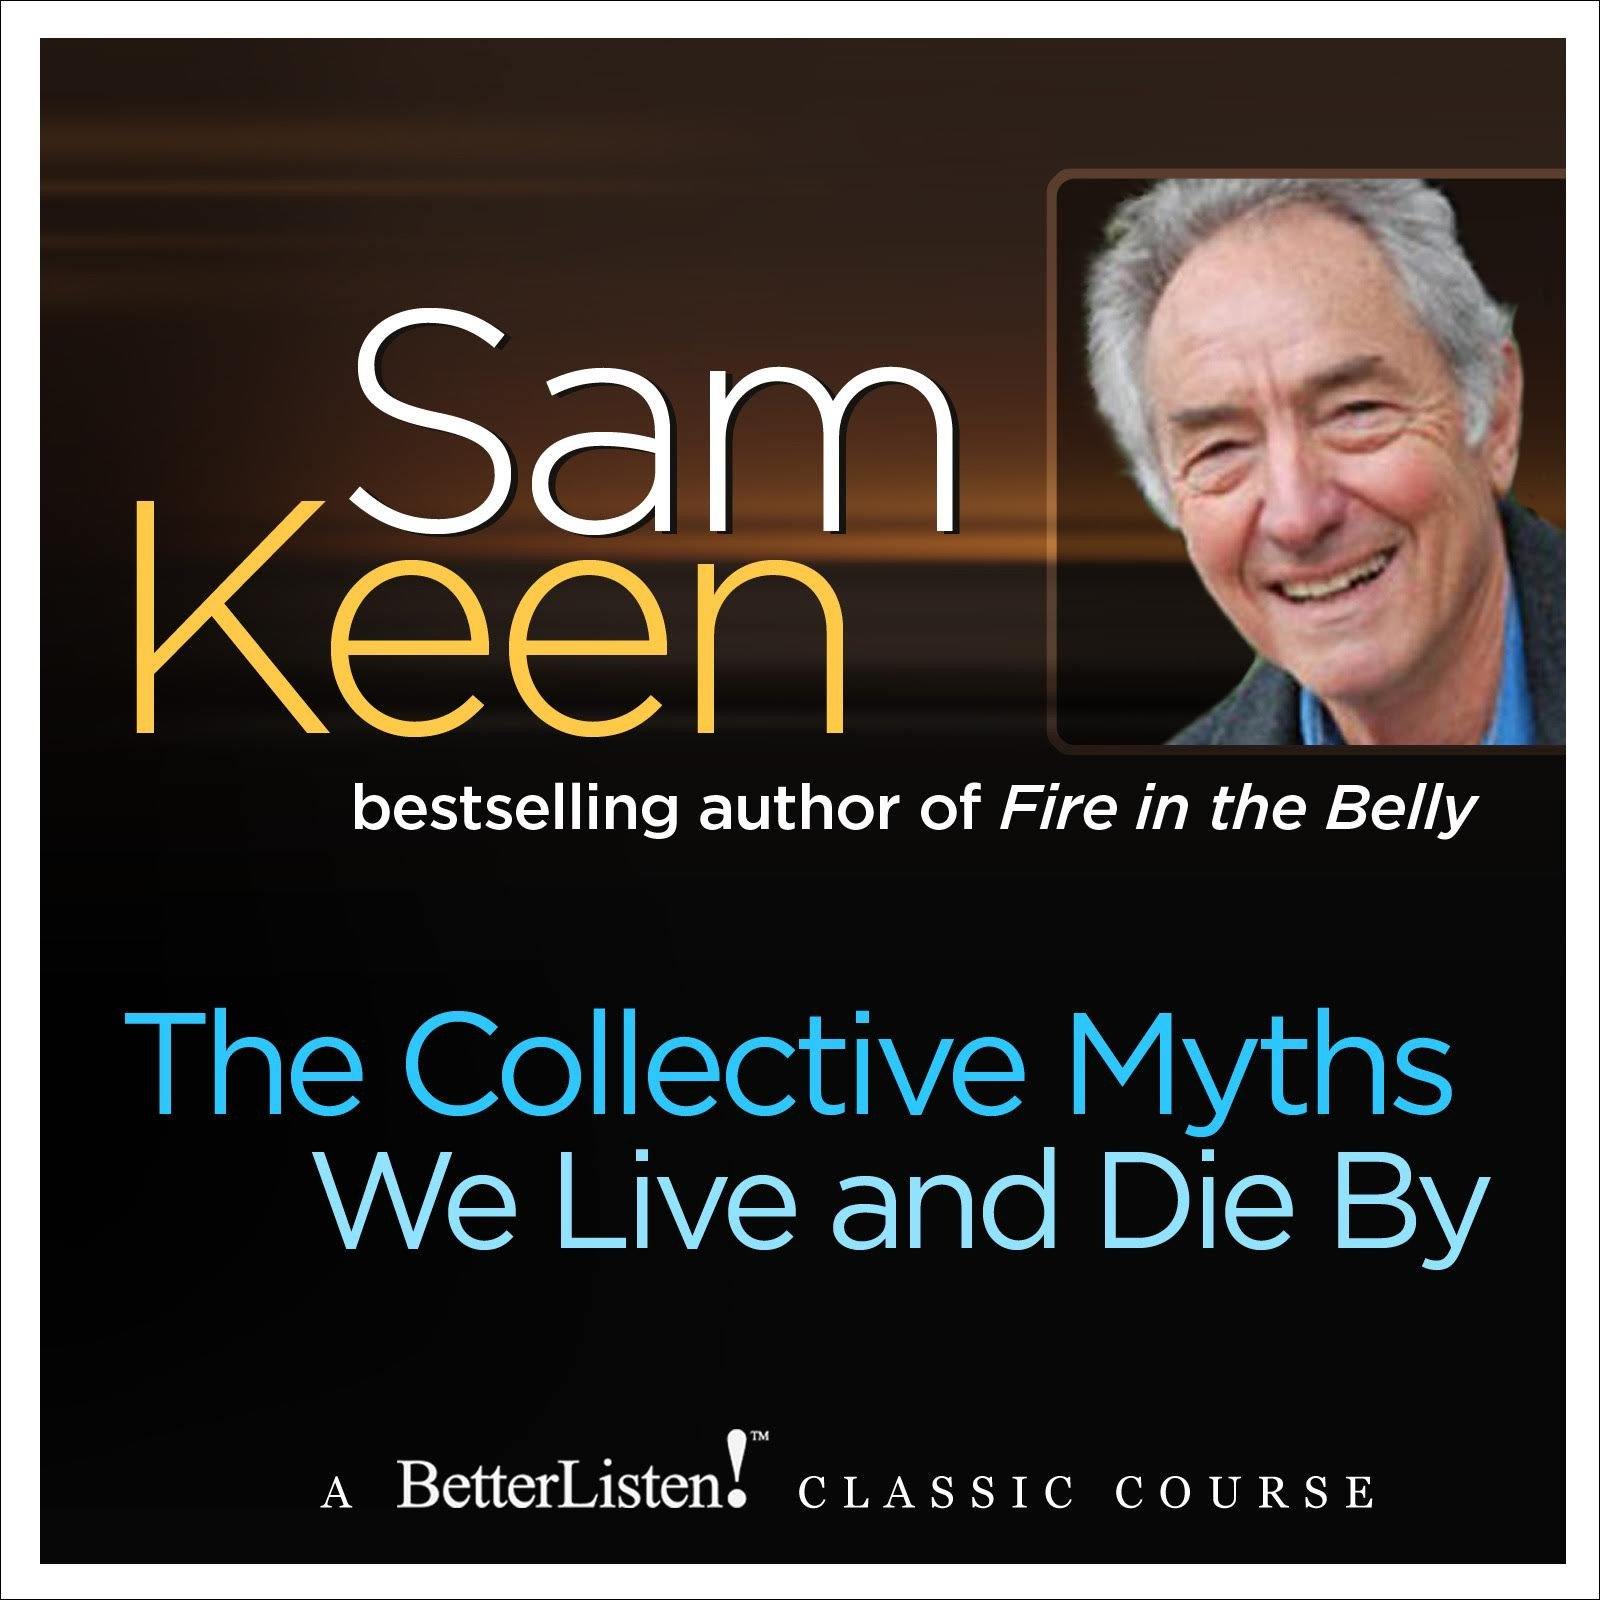 The Collective Myths We Live and Die By Audio Program Sam Keen - BetterListen!